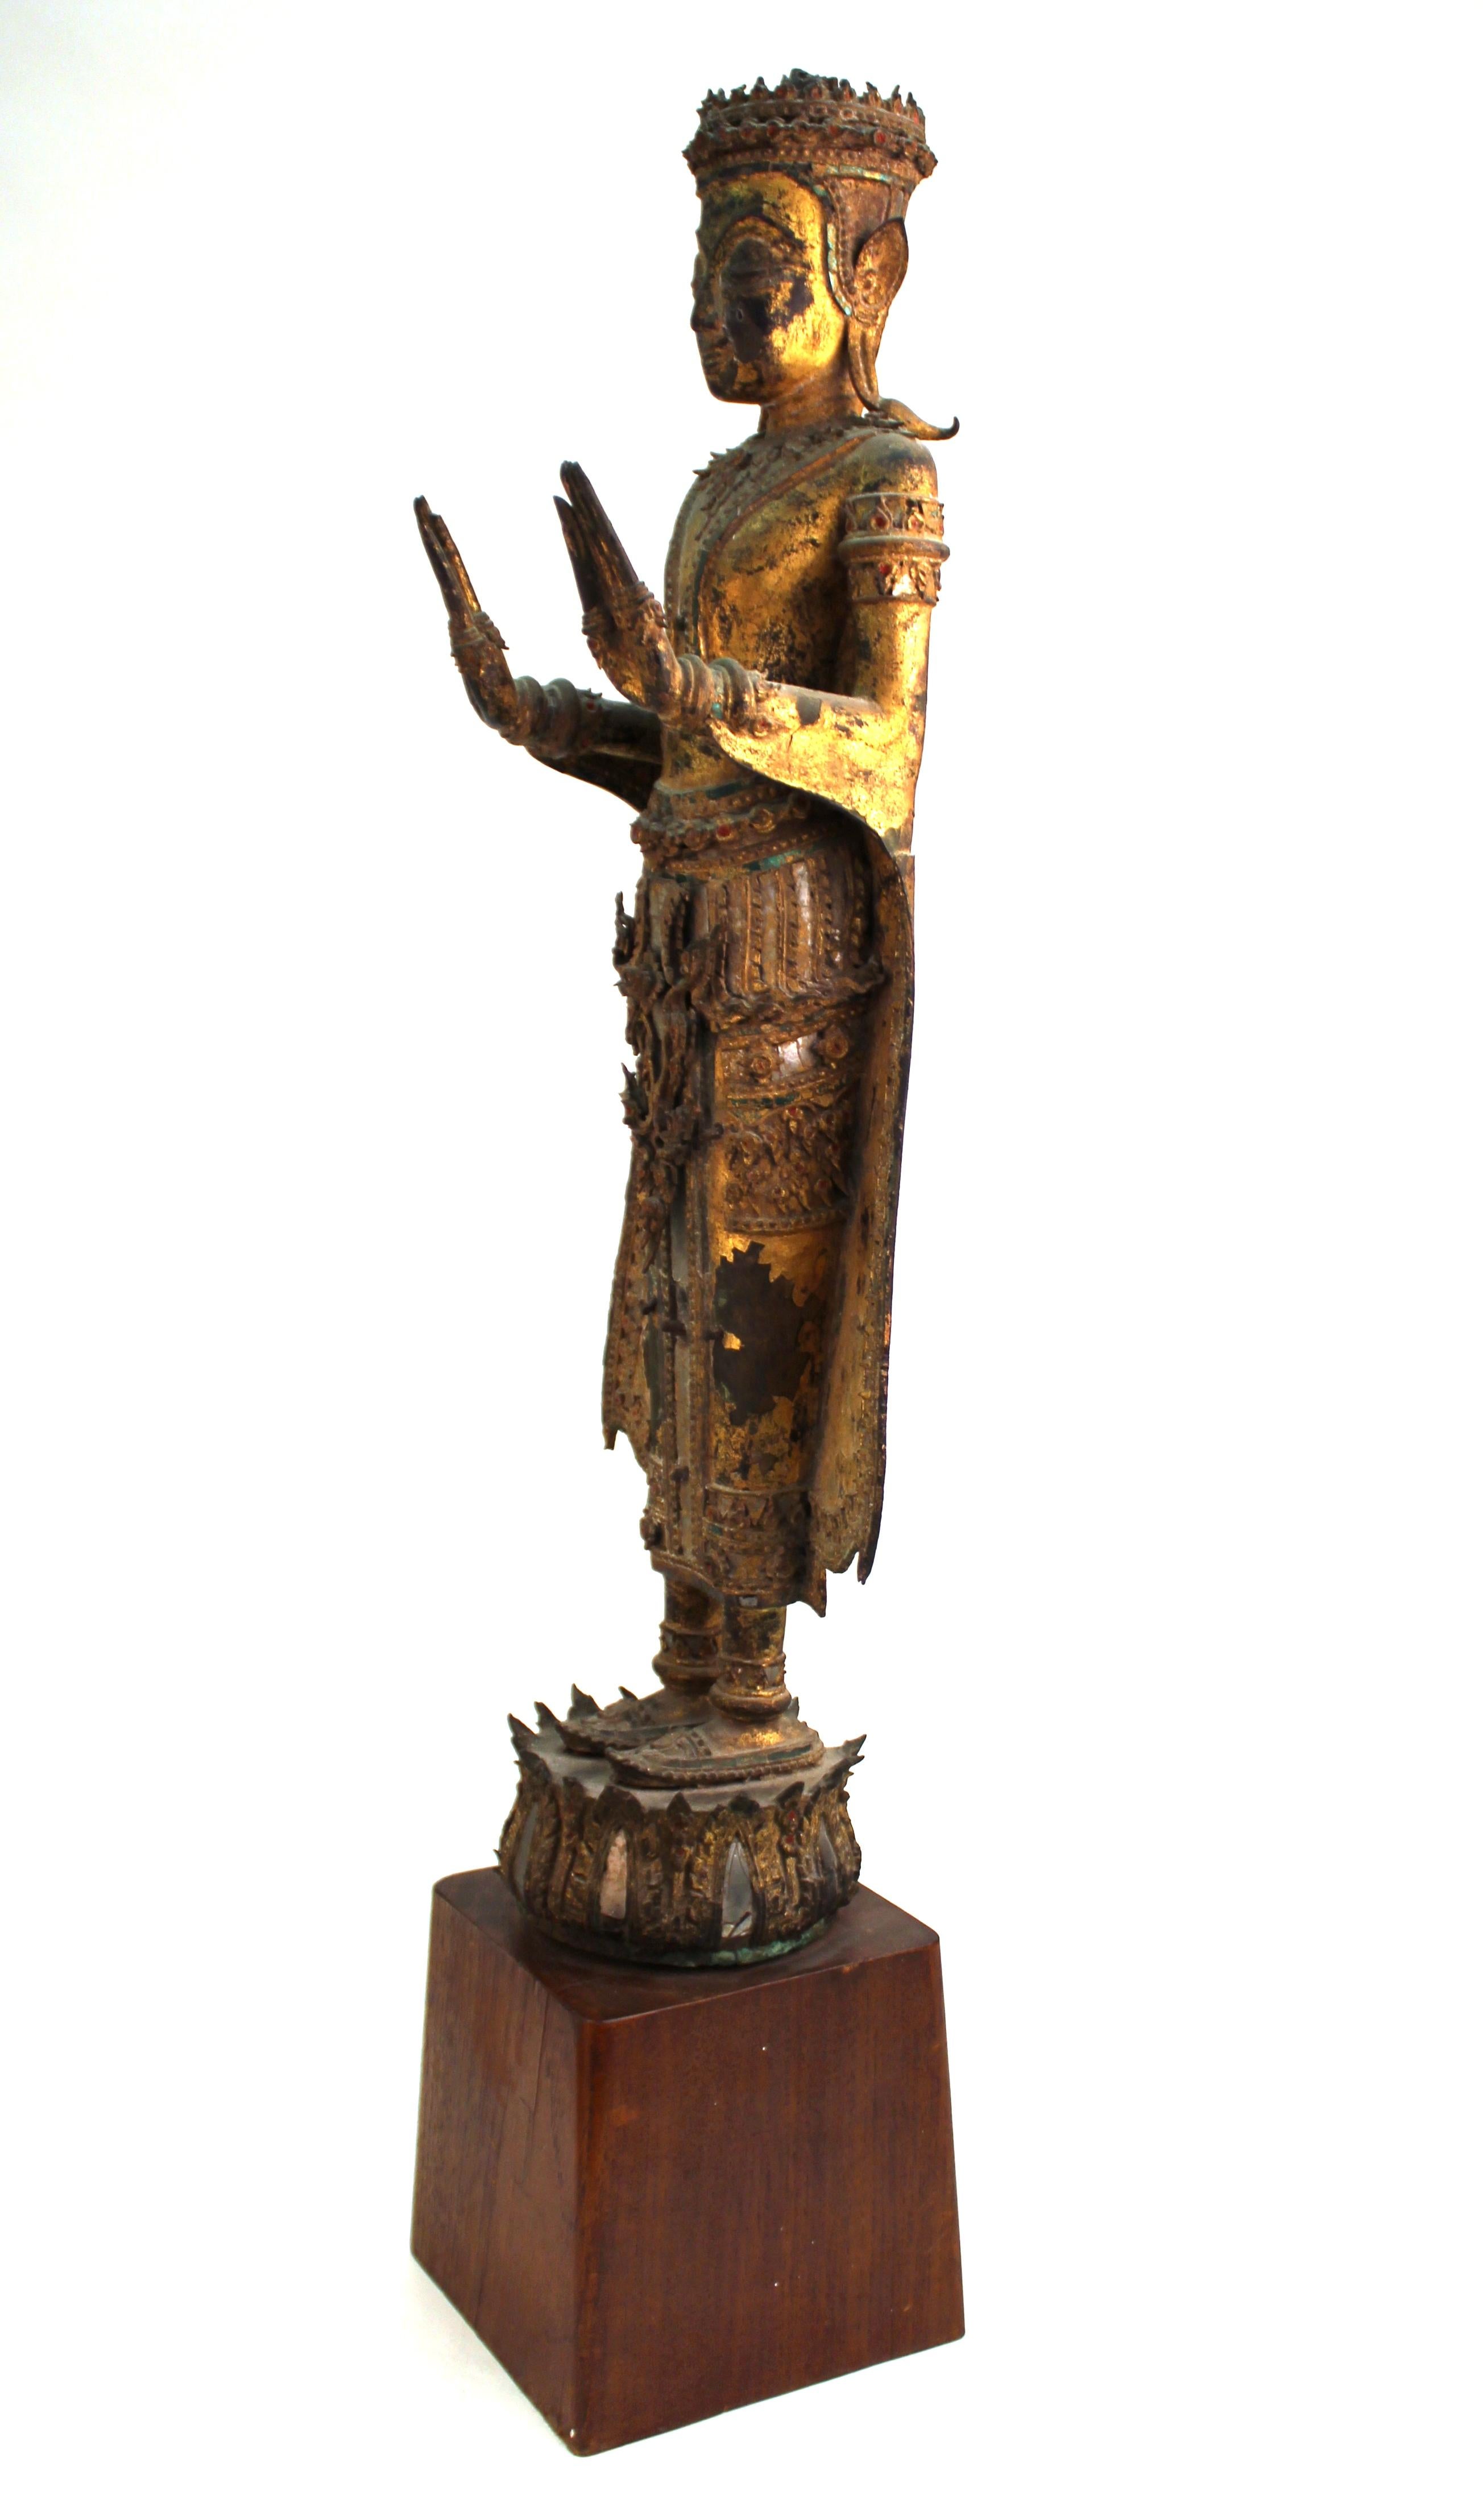 Thai antique gilded and mirrored bronze Buddha statue from the 18th century, atop a wooden base. The Buddha is wearing elaborately detailed ceremonial garments and adornments and is standing atop a lotus base. In great antique condition with